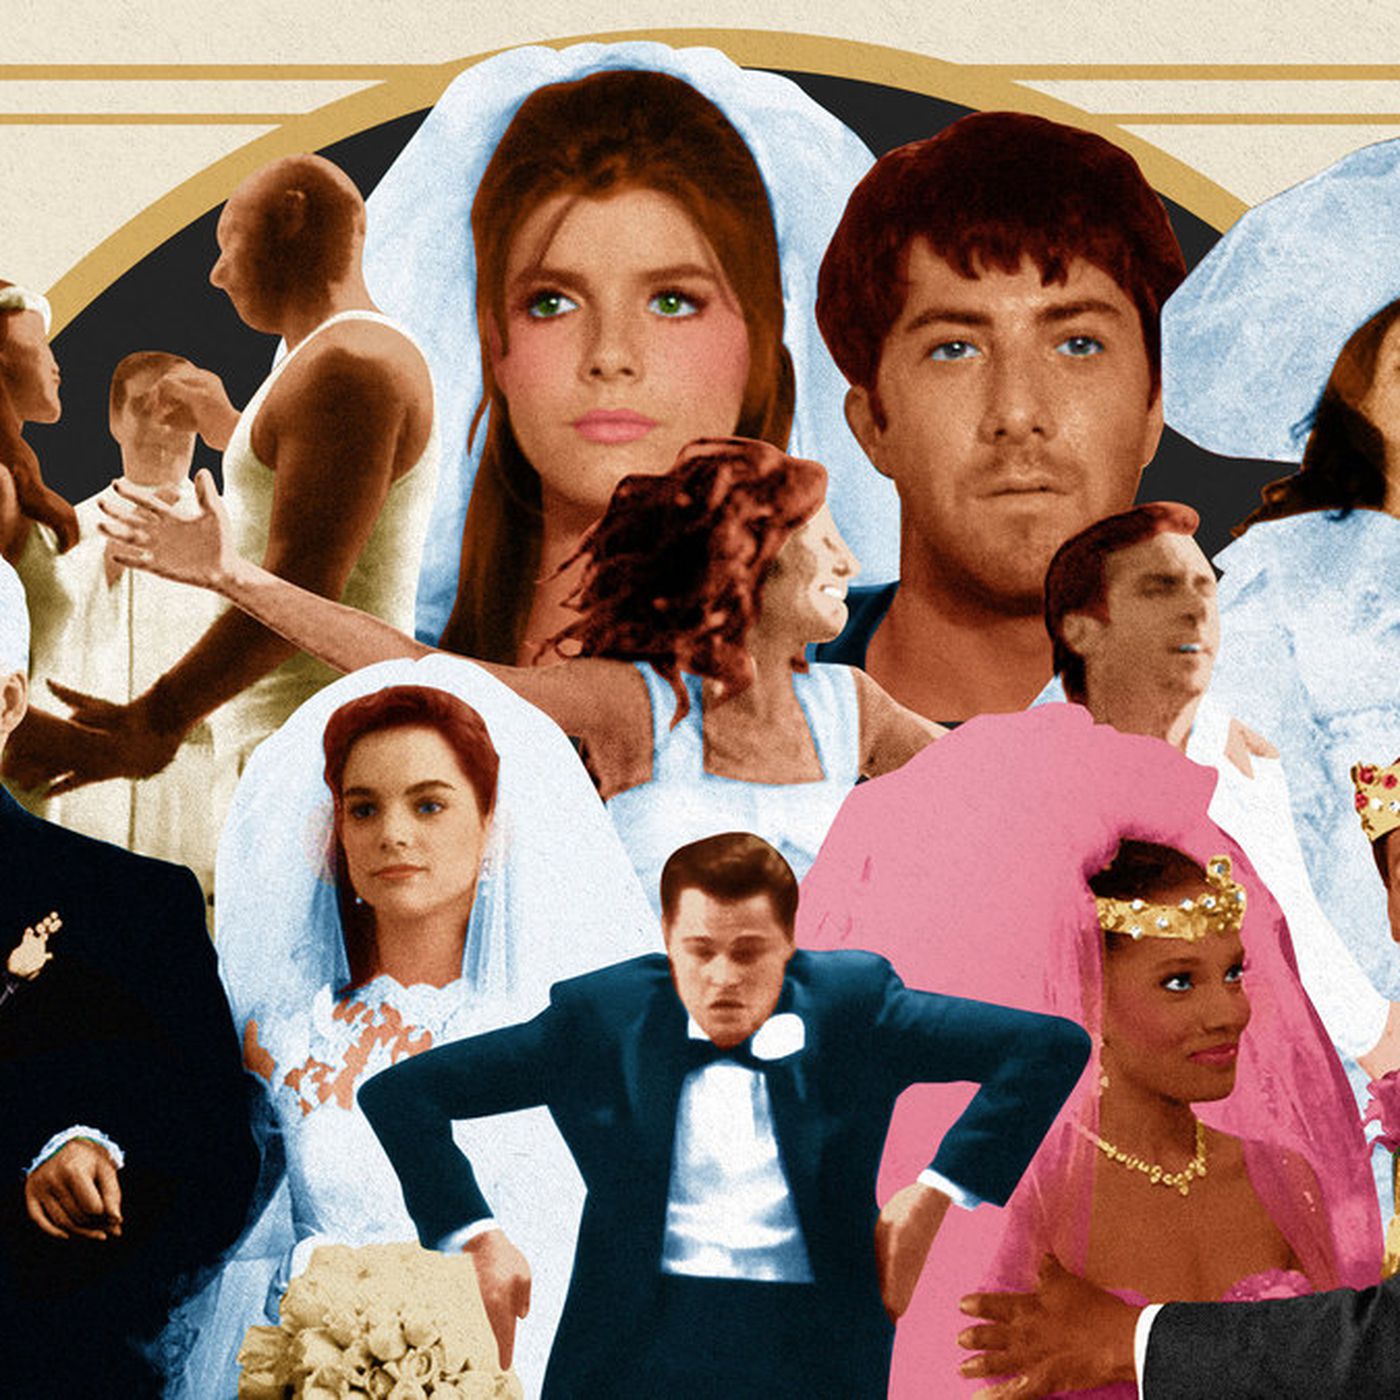 Wedding Scenes from TV and Movies Trivia Quiz